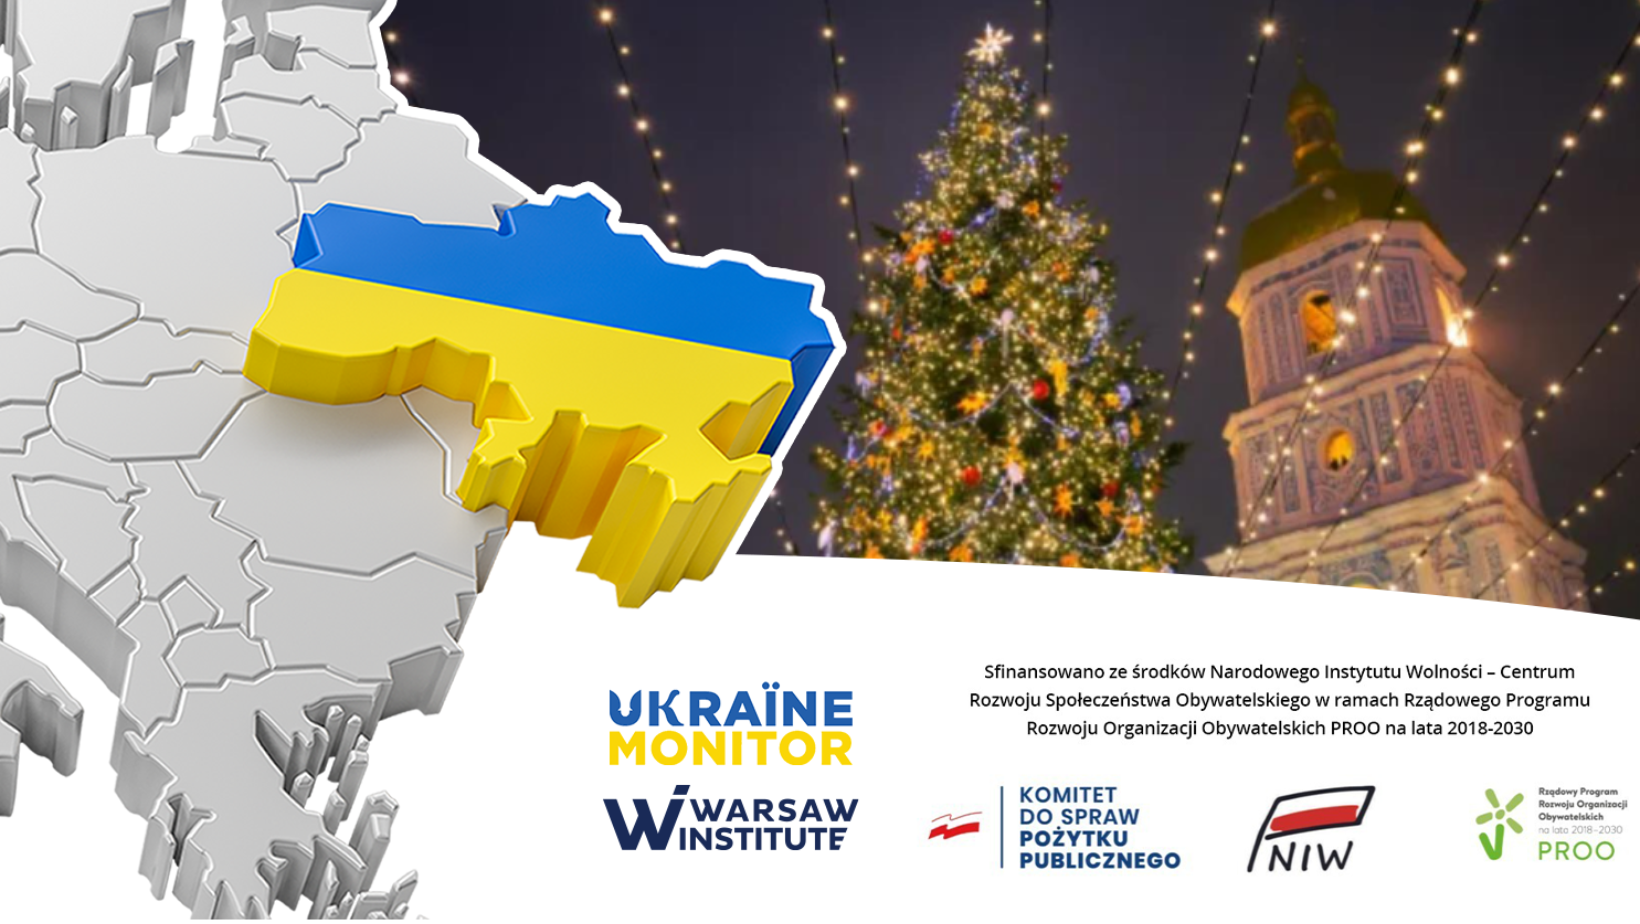 Ukrainians Celebrate Christmas on December 25 for the First Time